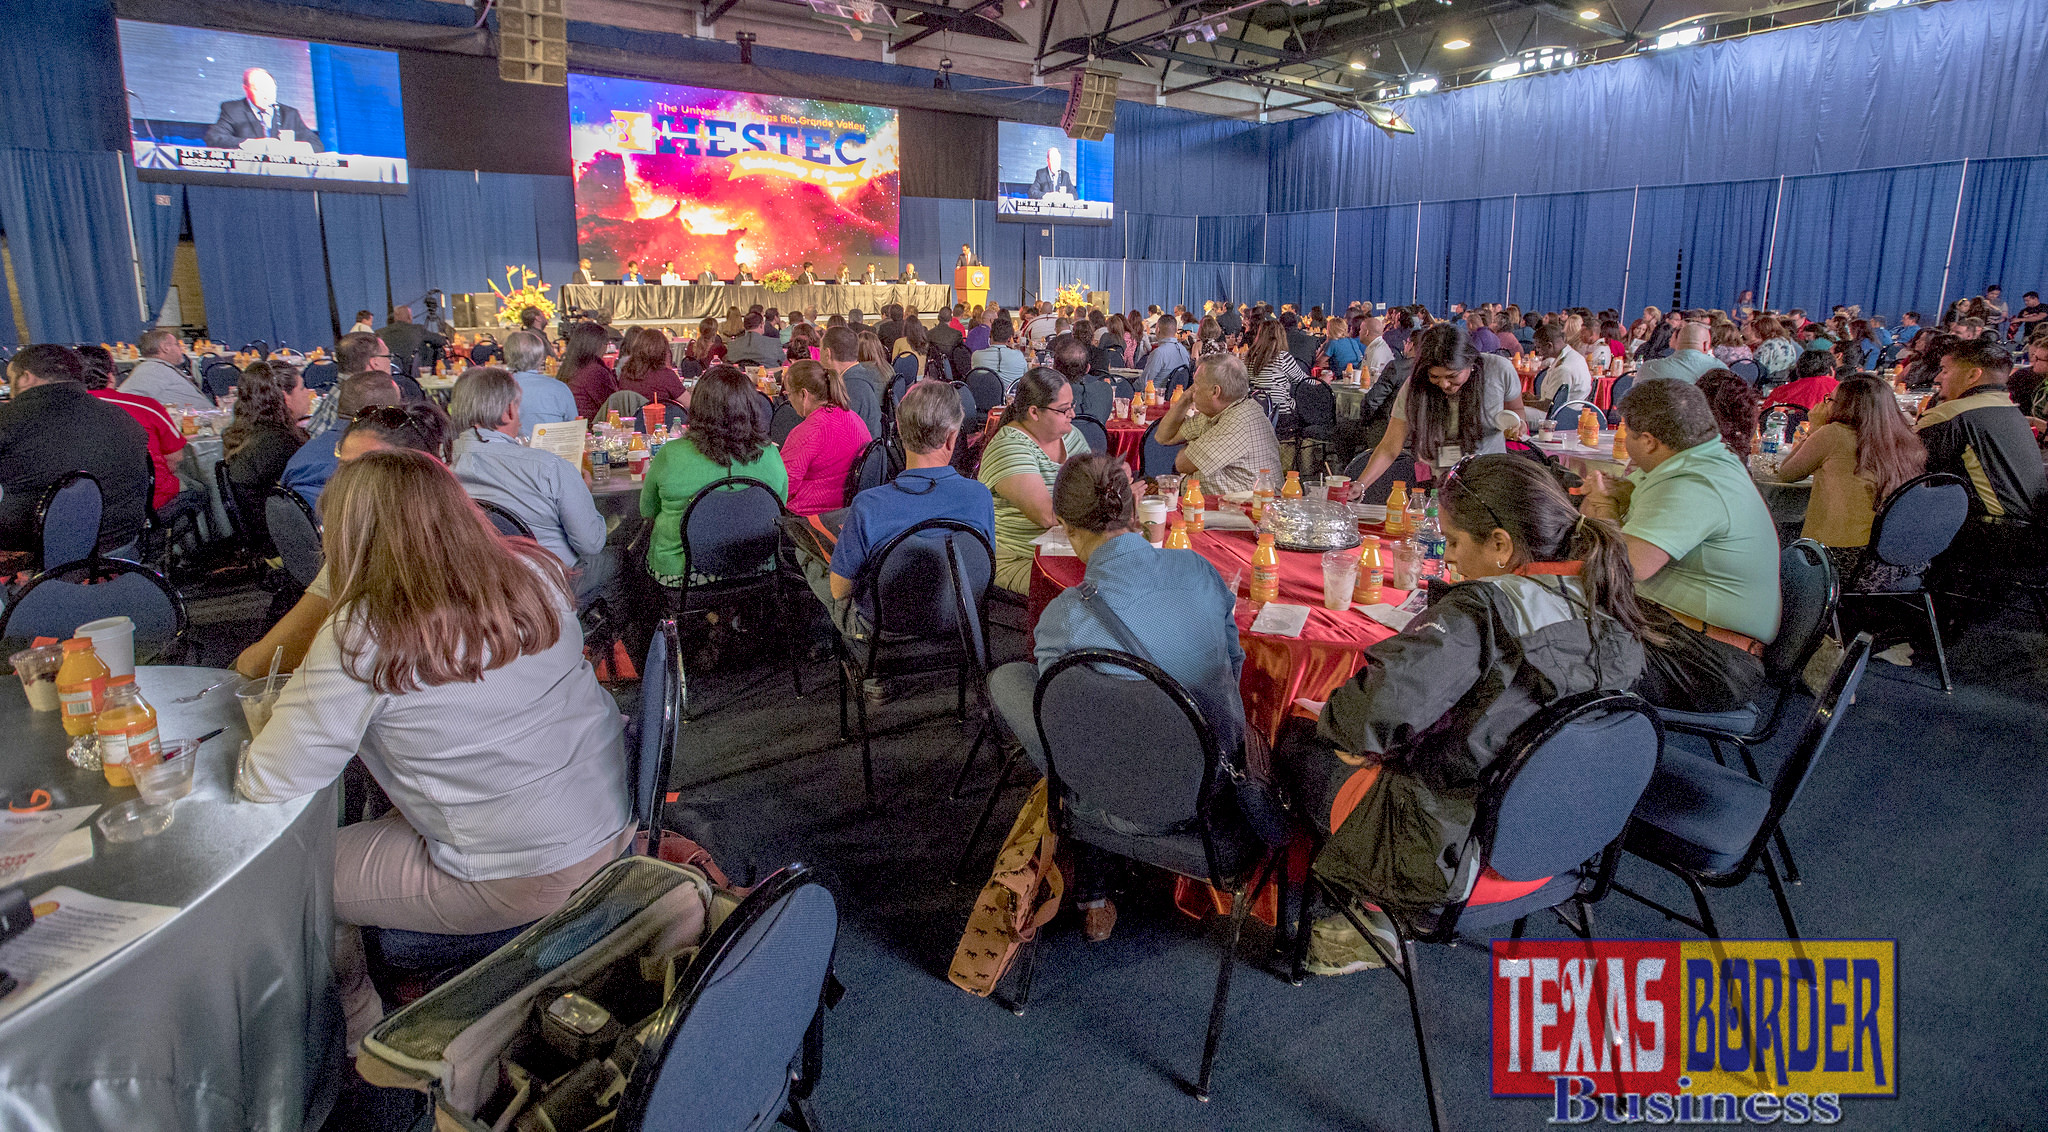 Educators from across the Rio Grande Valley gathered Monday, Oct. 3, 2016, on the UTRGV Edinburg Campus for the opening day of the 15th annual HESTEC Week. Activities included a Congressional Panel Discussion, shown here, hosted by Telemundo anchor José Diaz-Balart. (UTRGV Photo by David Pike)